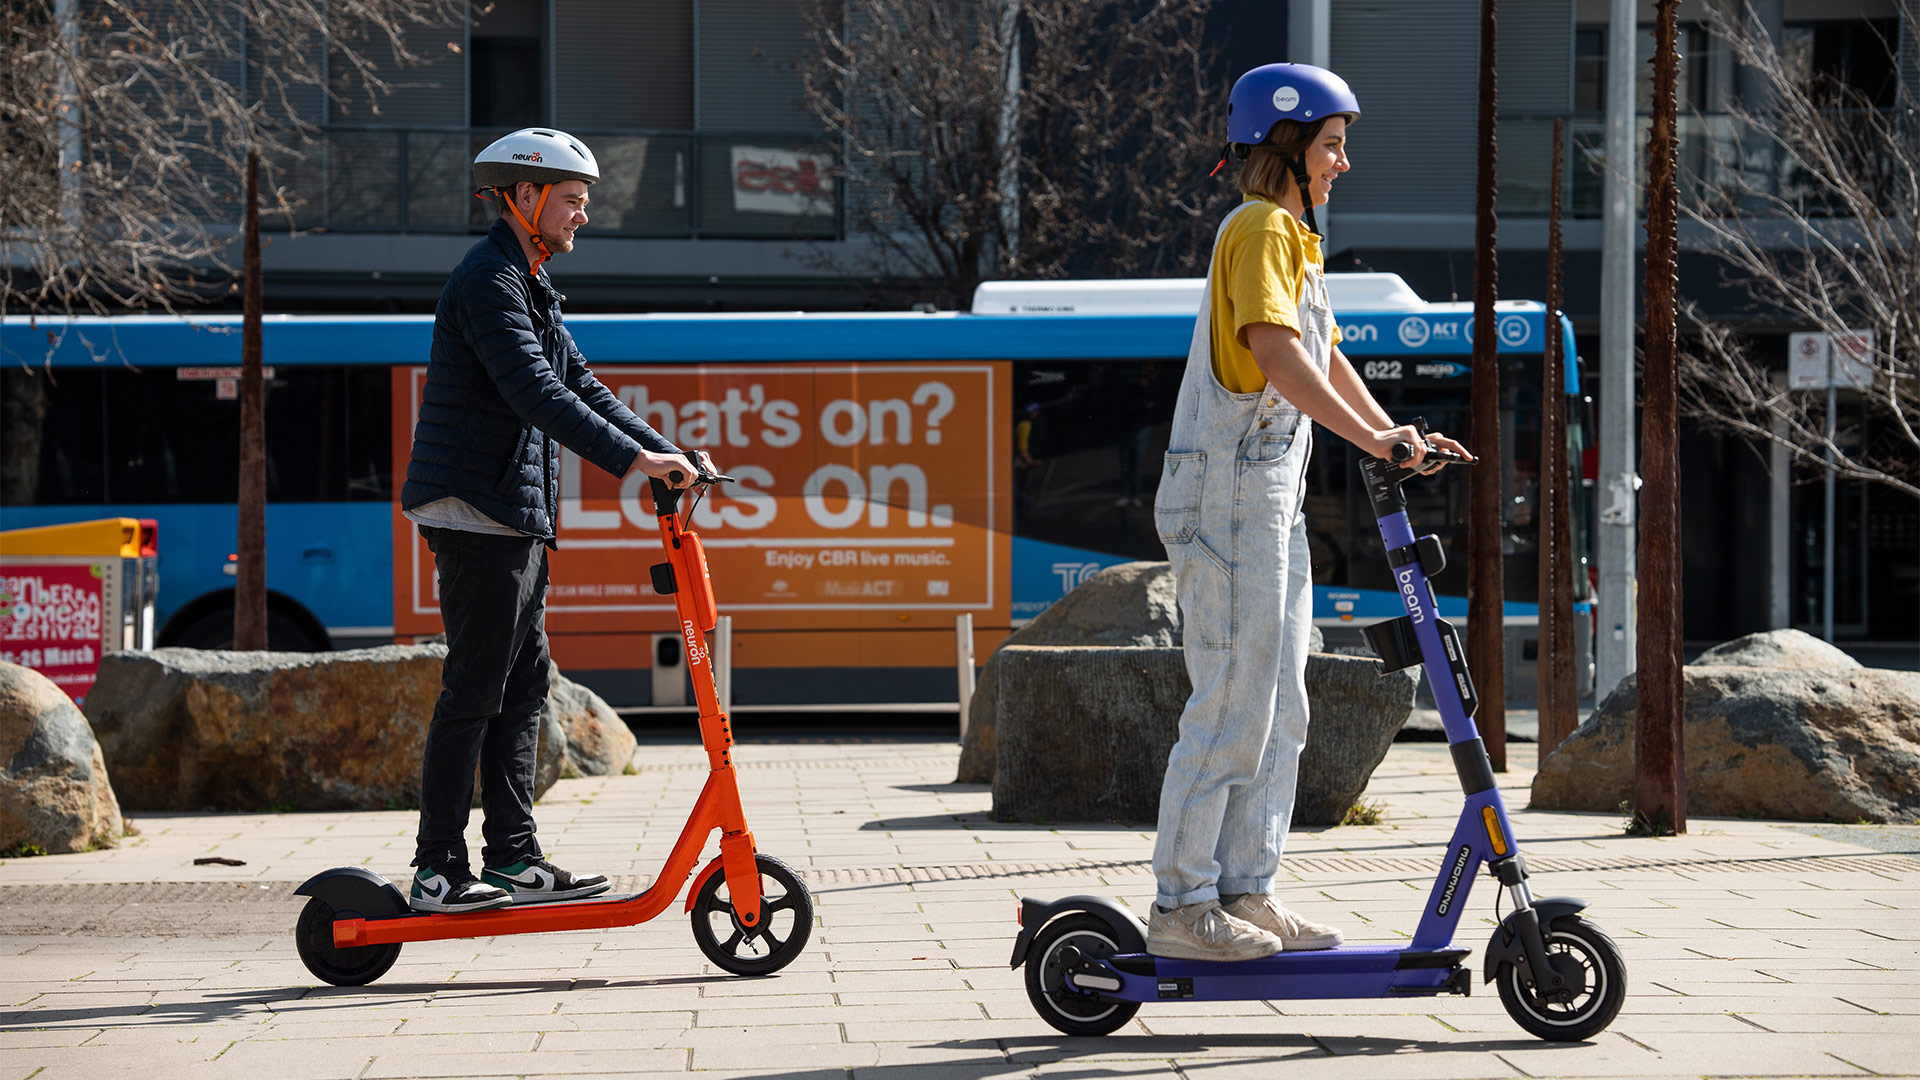 Two people ride orange and purple electric scooters in front of apartment building.